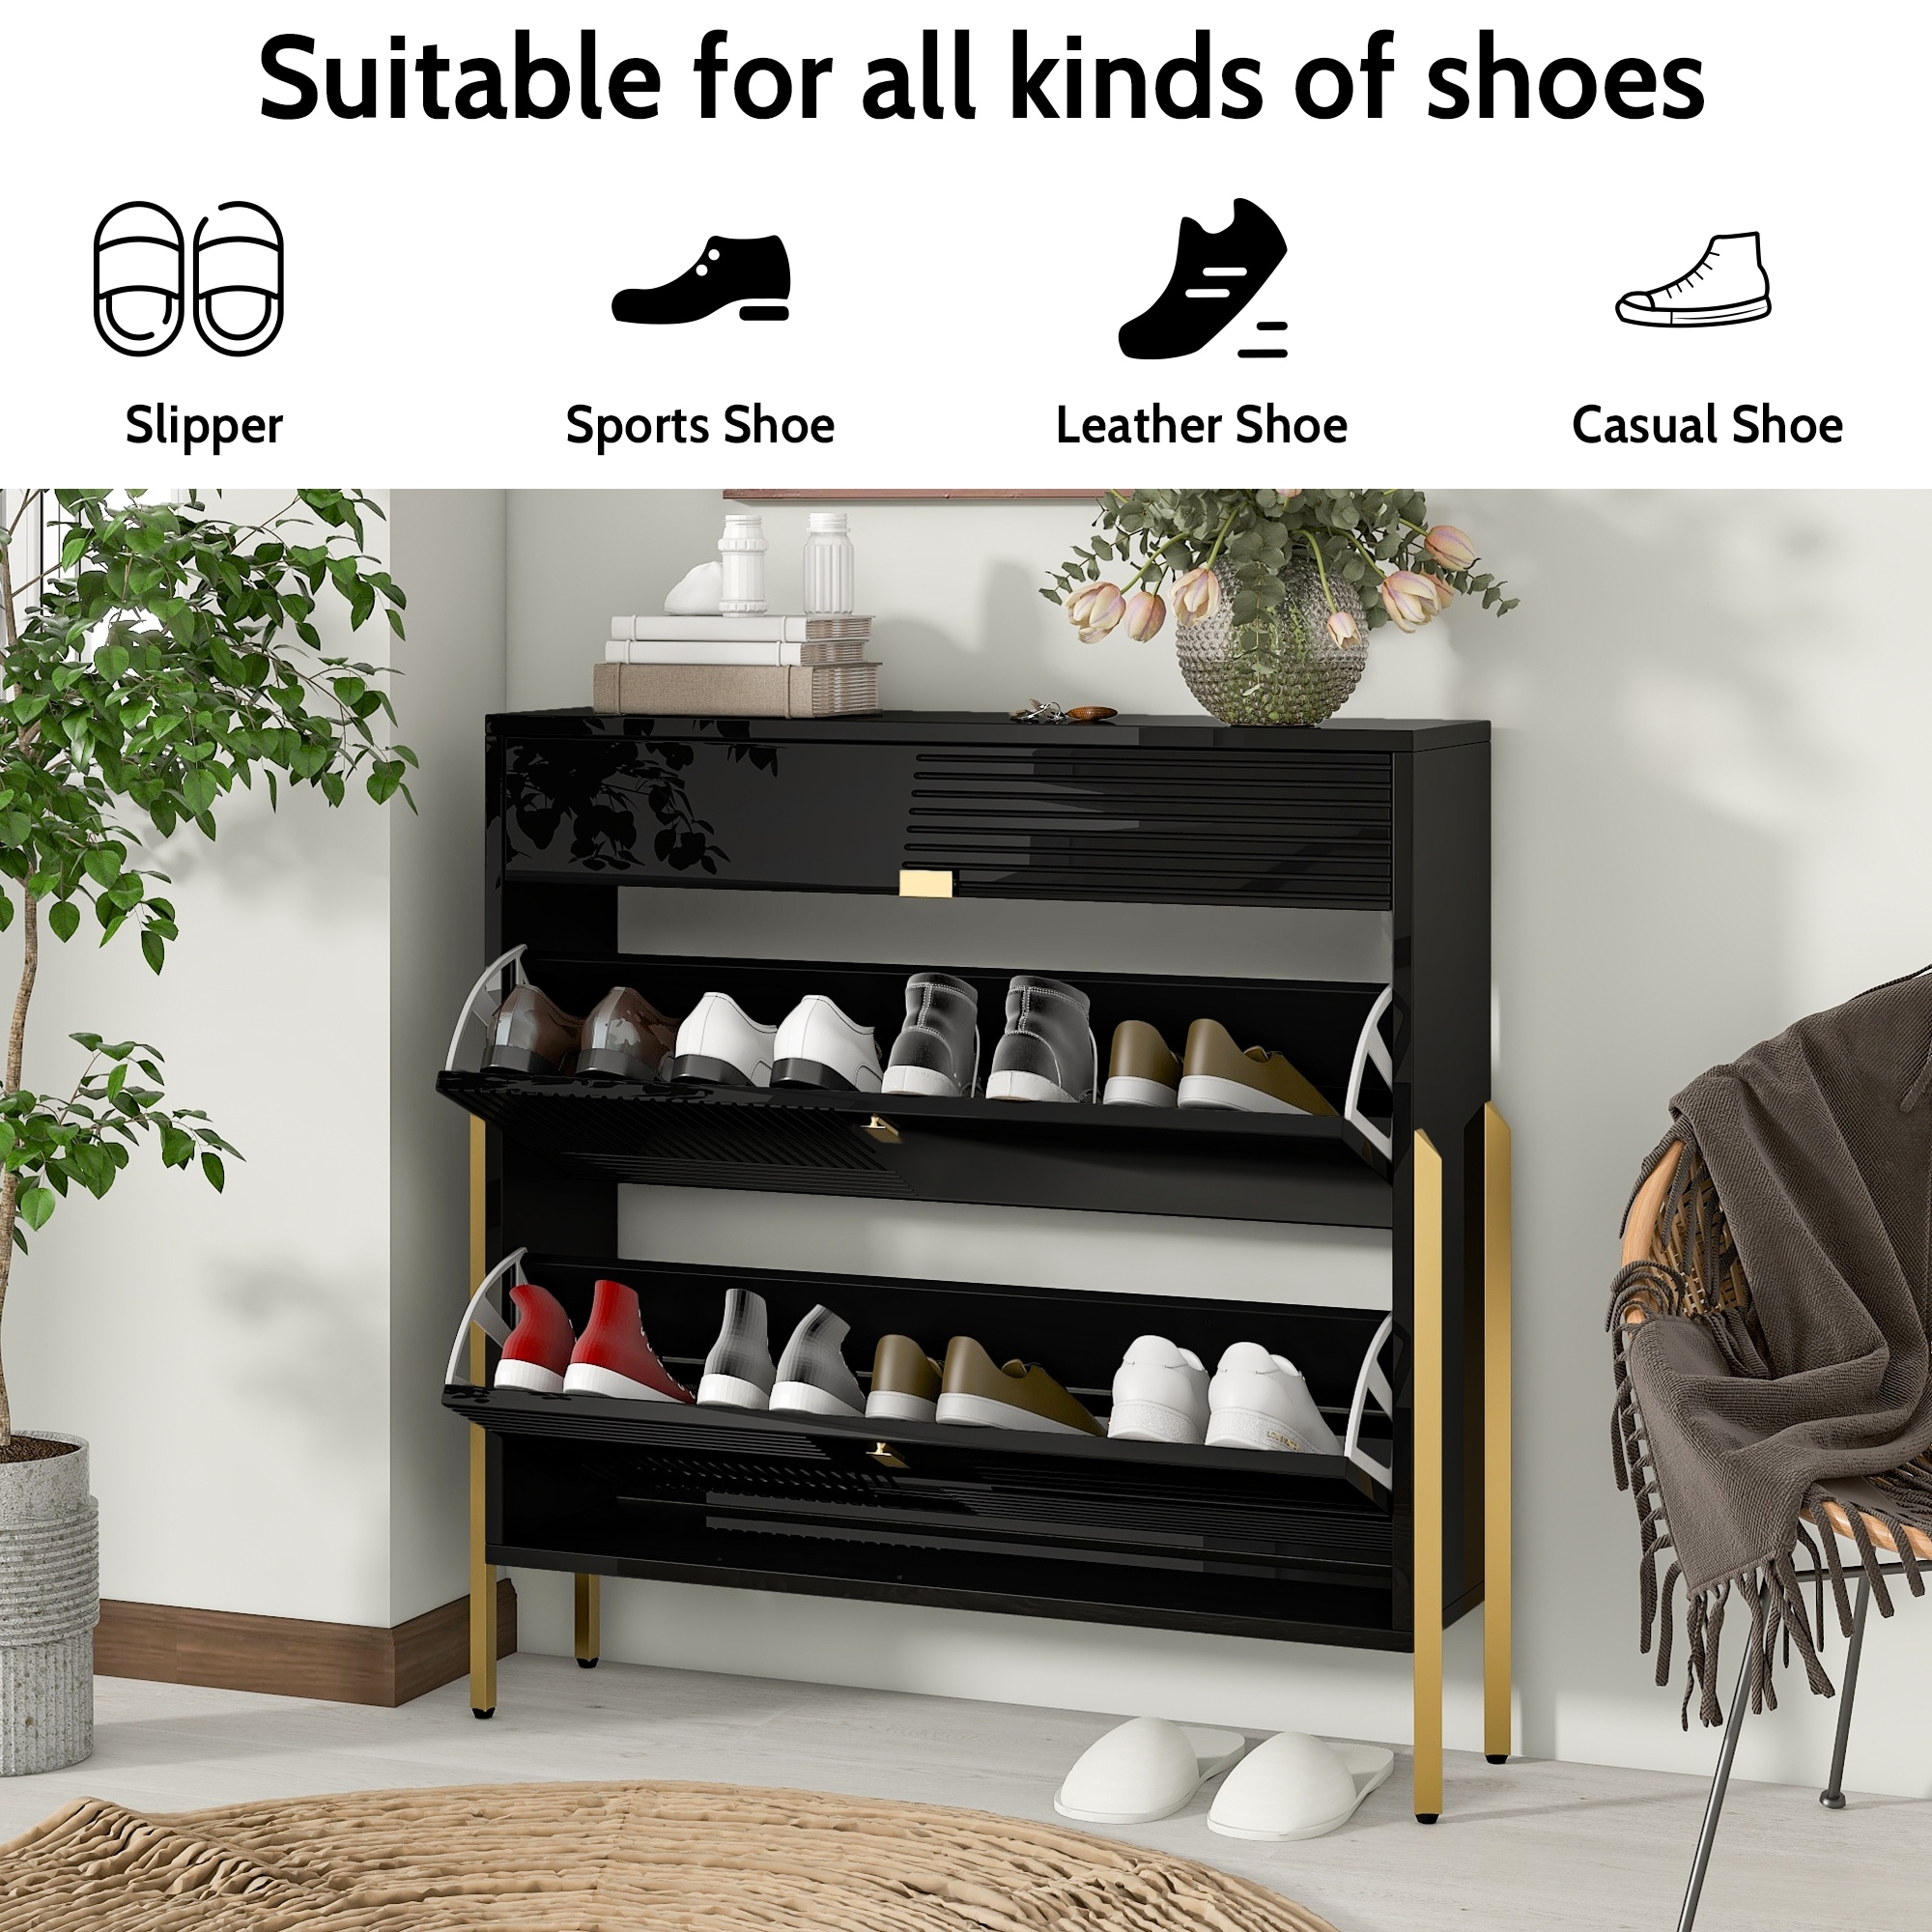 https://ak1.ostkcdn.com/images/products/is/images/direct/c4dabc87ad0d97b871fa895a6a8b61e1419c47ca/Modern-Shoe-Cabinet-with-2-Flip-Drawers-%26-1-Slide-Drawer%2C-Modern-Free-Standing-Shoe-Rack-Shoe-Storage-Cabinet.jpg